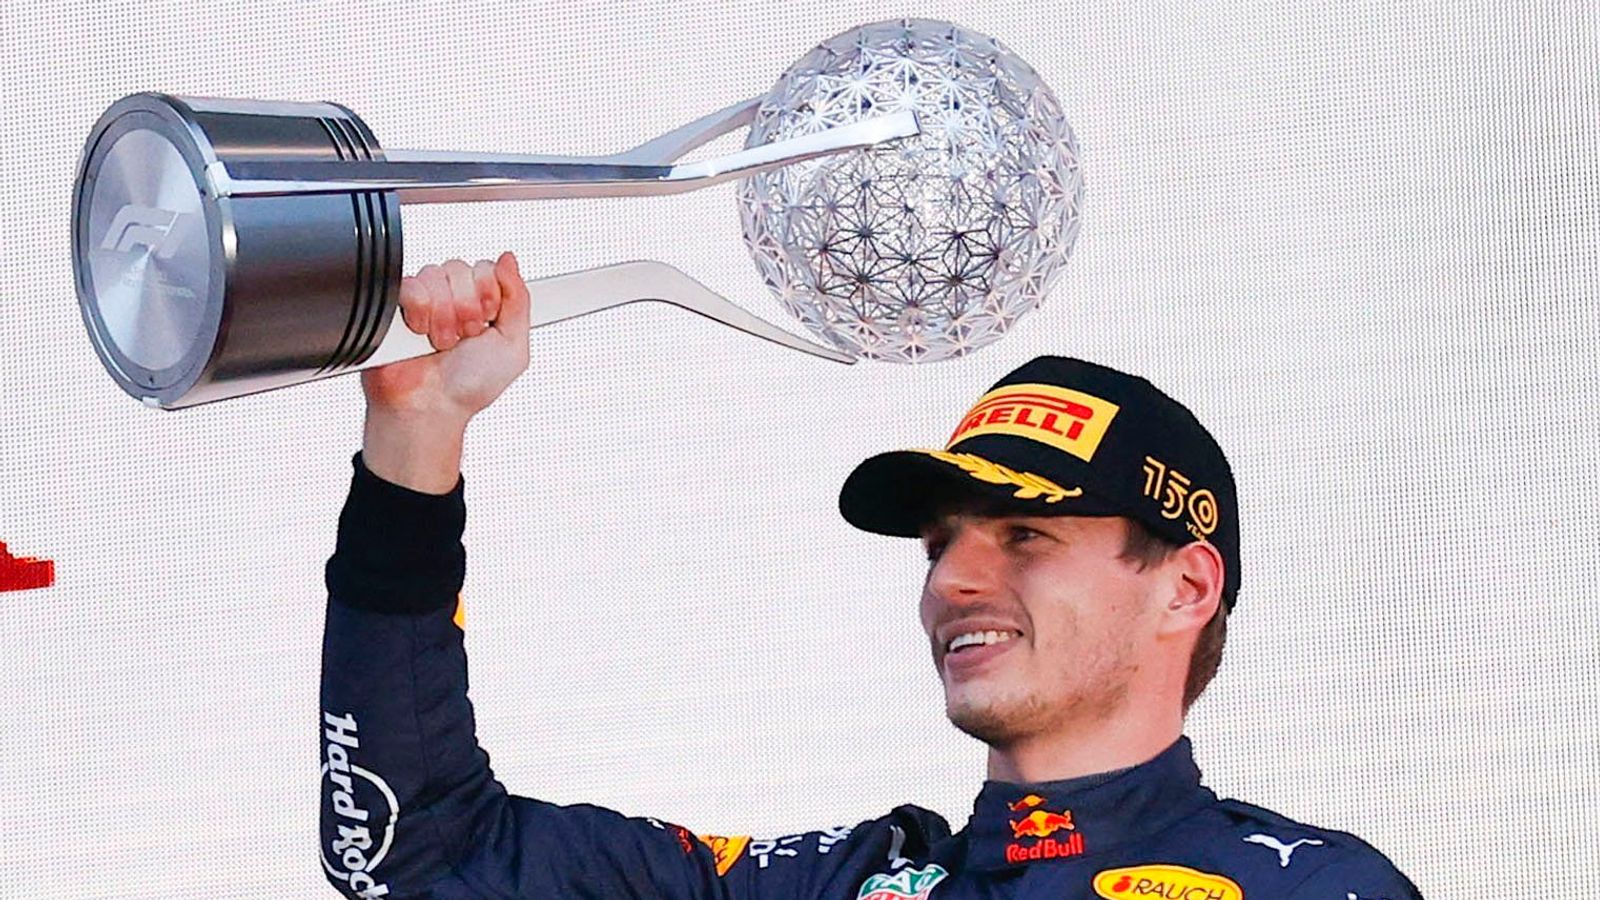 Max Verstappen crowned F1 champion after winning chaotic Japanese Grand Prix